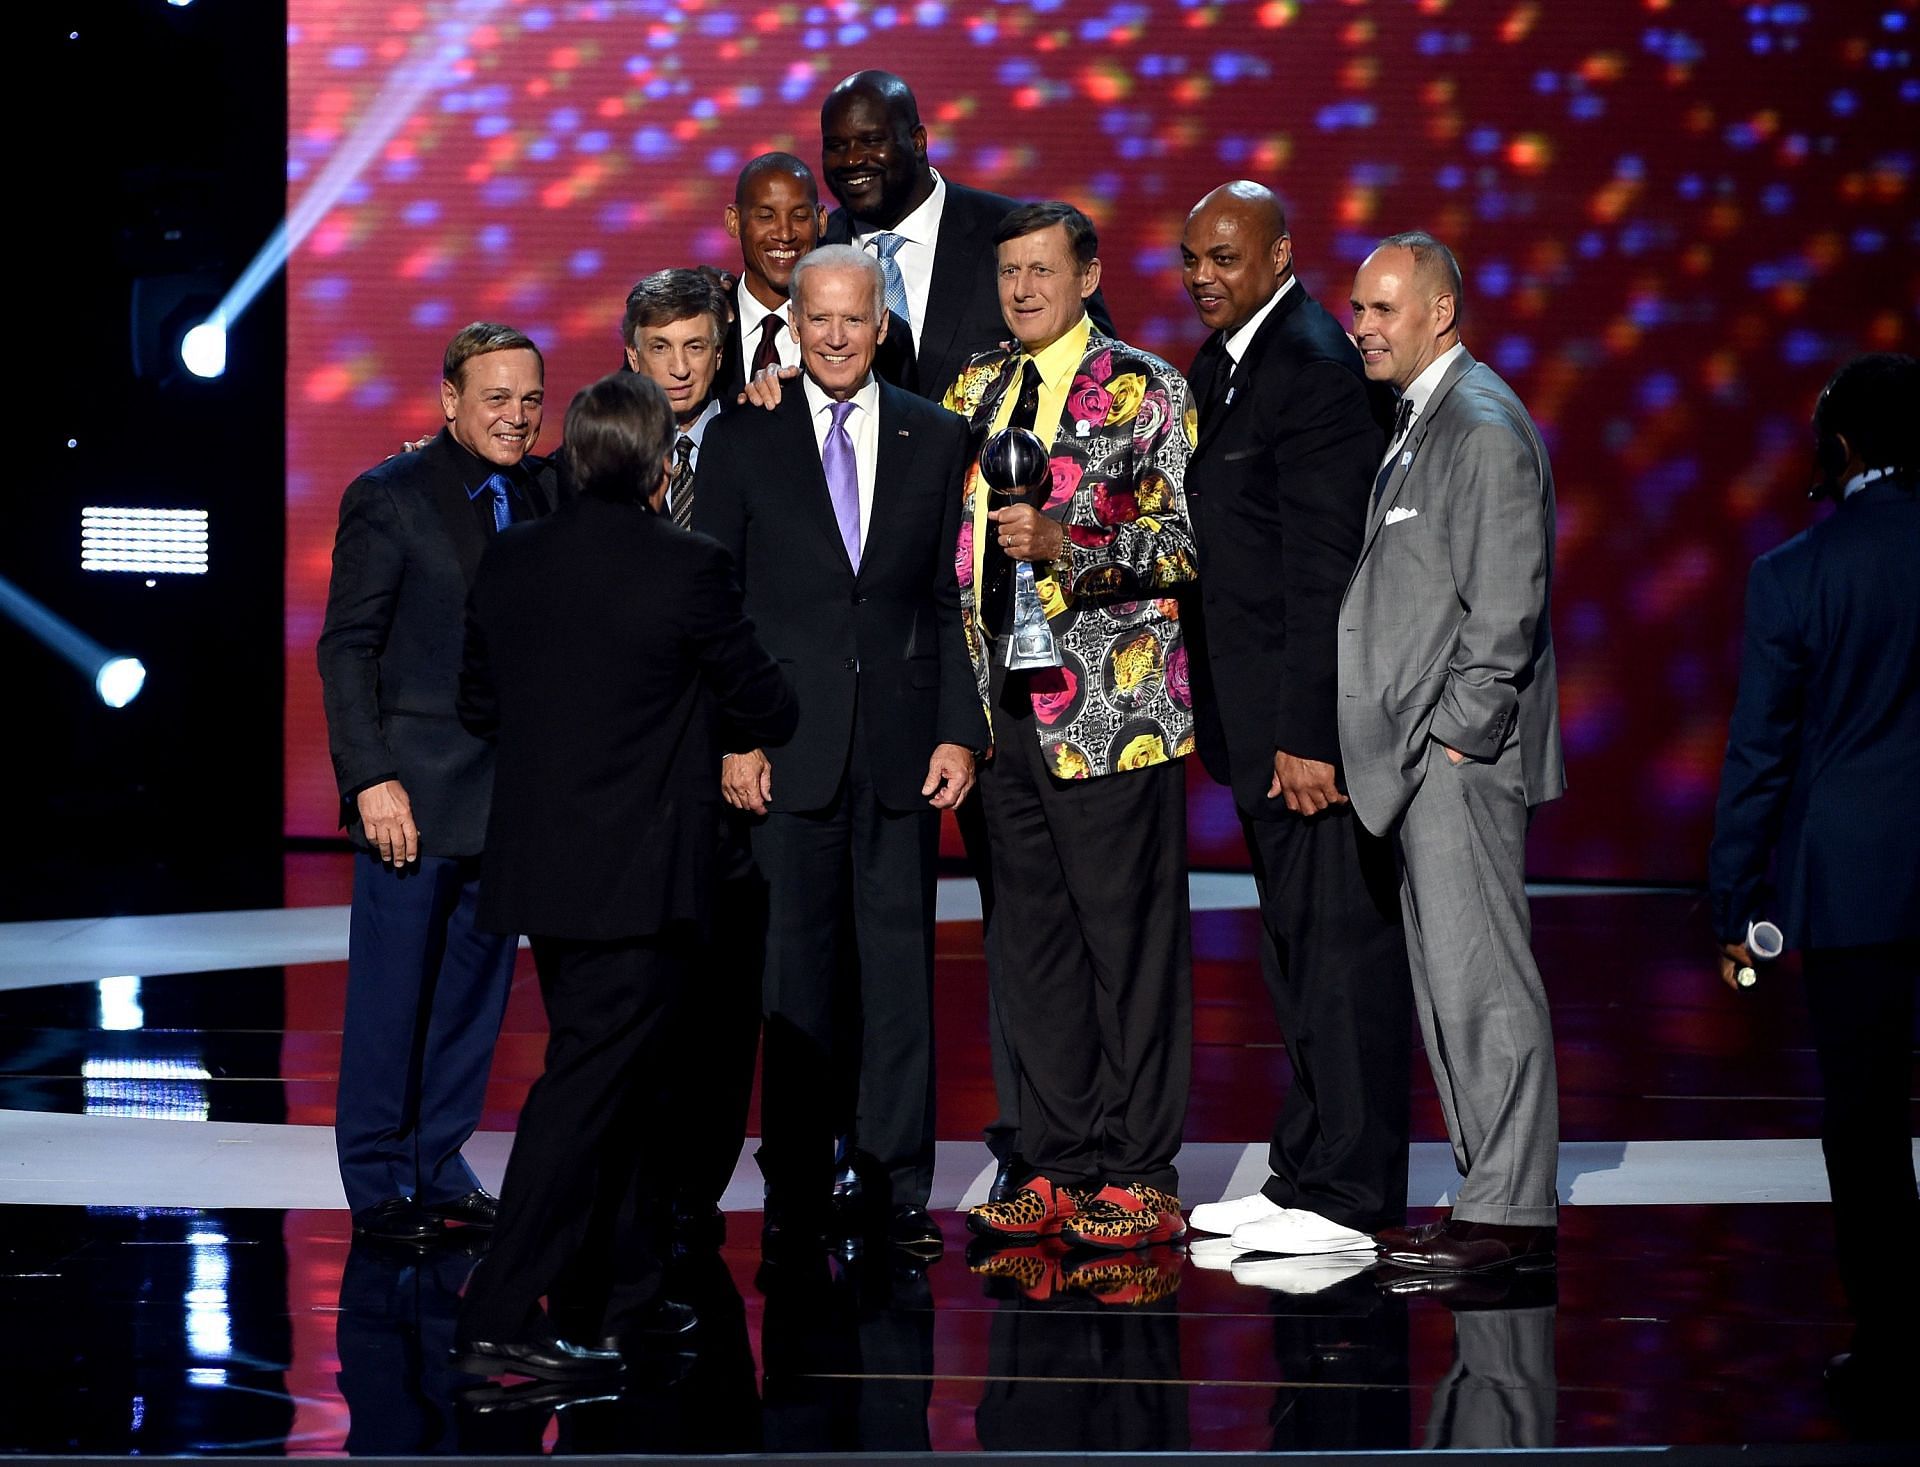 The NBA on TNT team at the 2016 ESPYS - Show